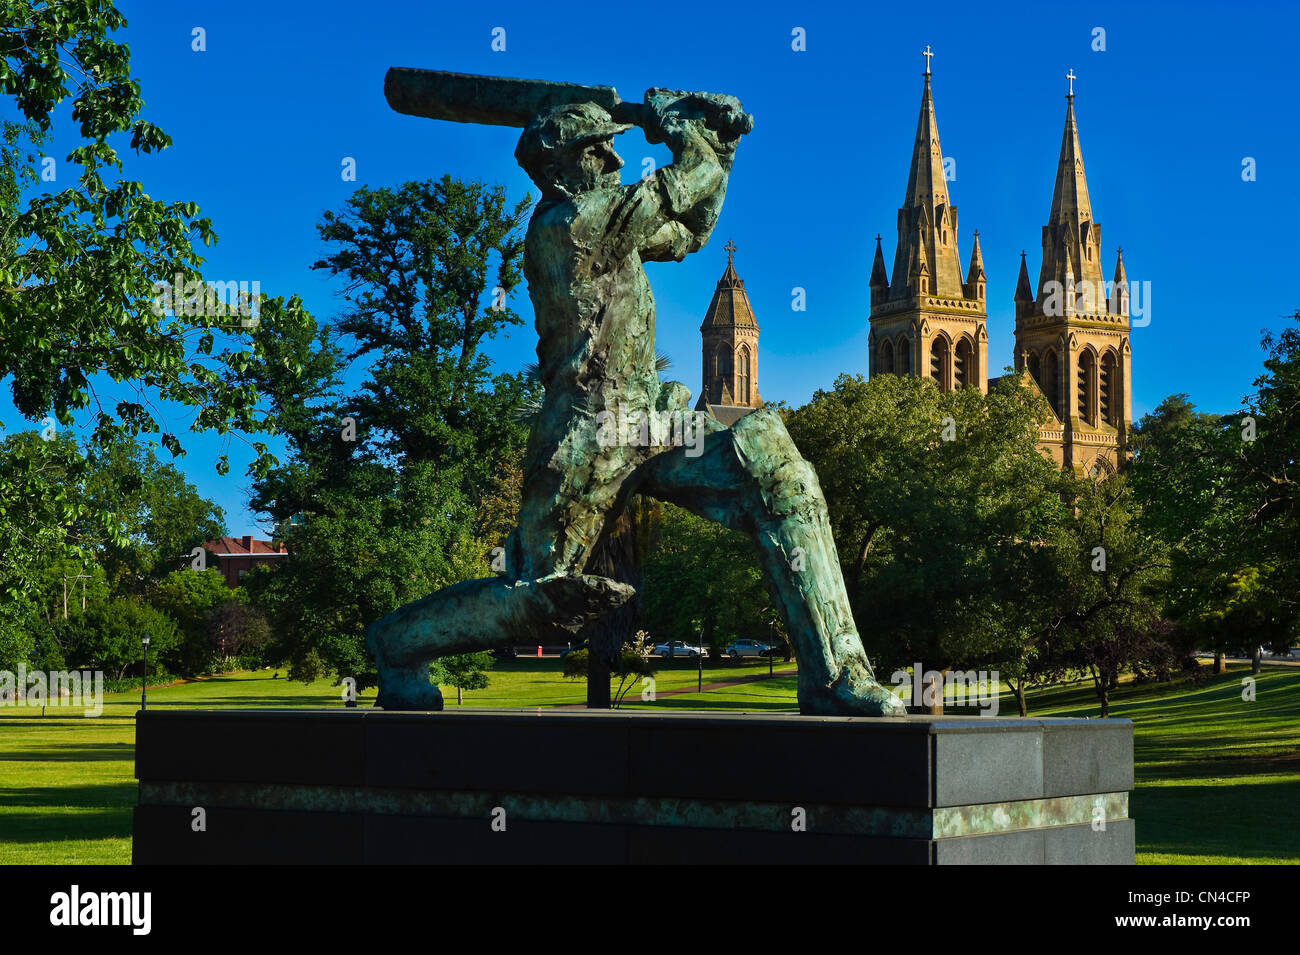 Australia, South Australia, Adelaide, Sir Donald Bradman (1908-2001) sculptur, a famous cricket player usually called the Don, Stock Photo